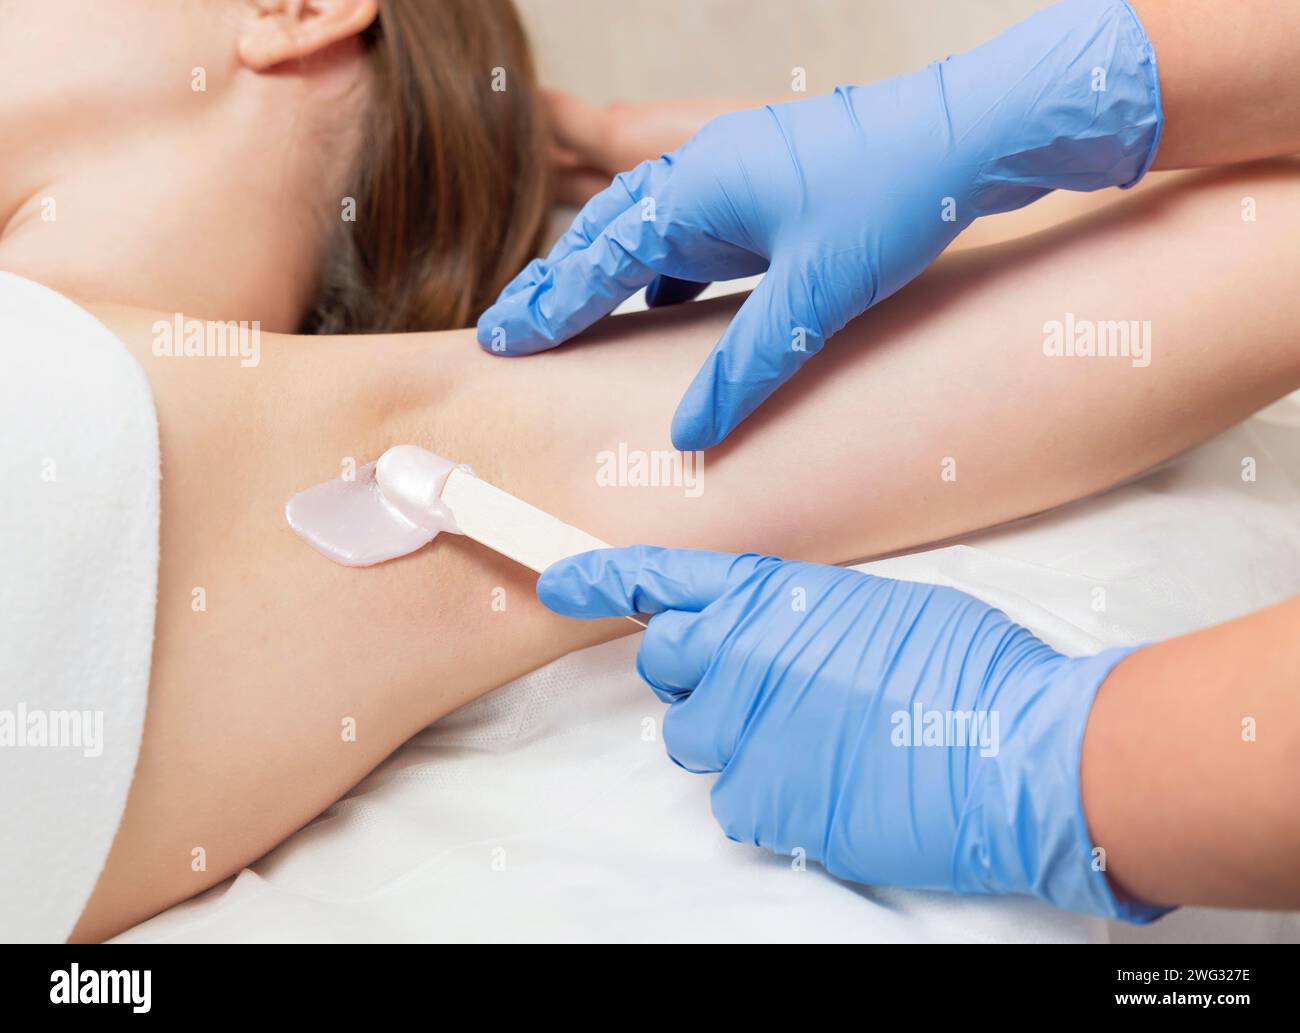 Armpit waxing procedure in a beauty salon. Master in gloves applies wax with a wooden spatula to a woman's armpit to remove hair. Stock Photo